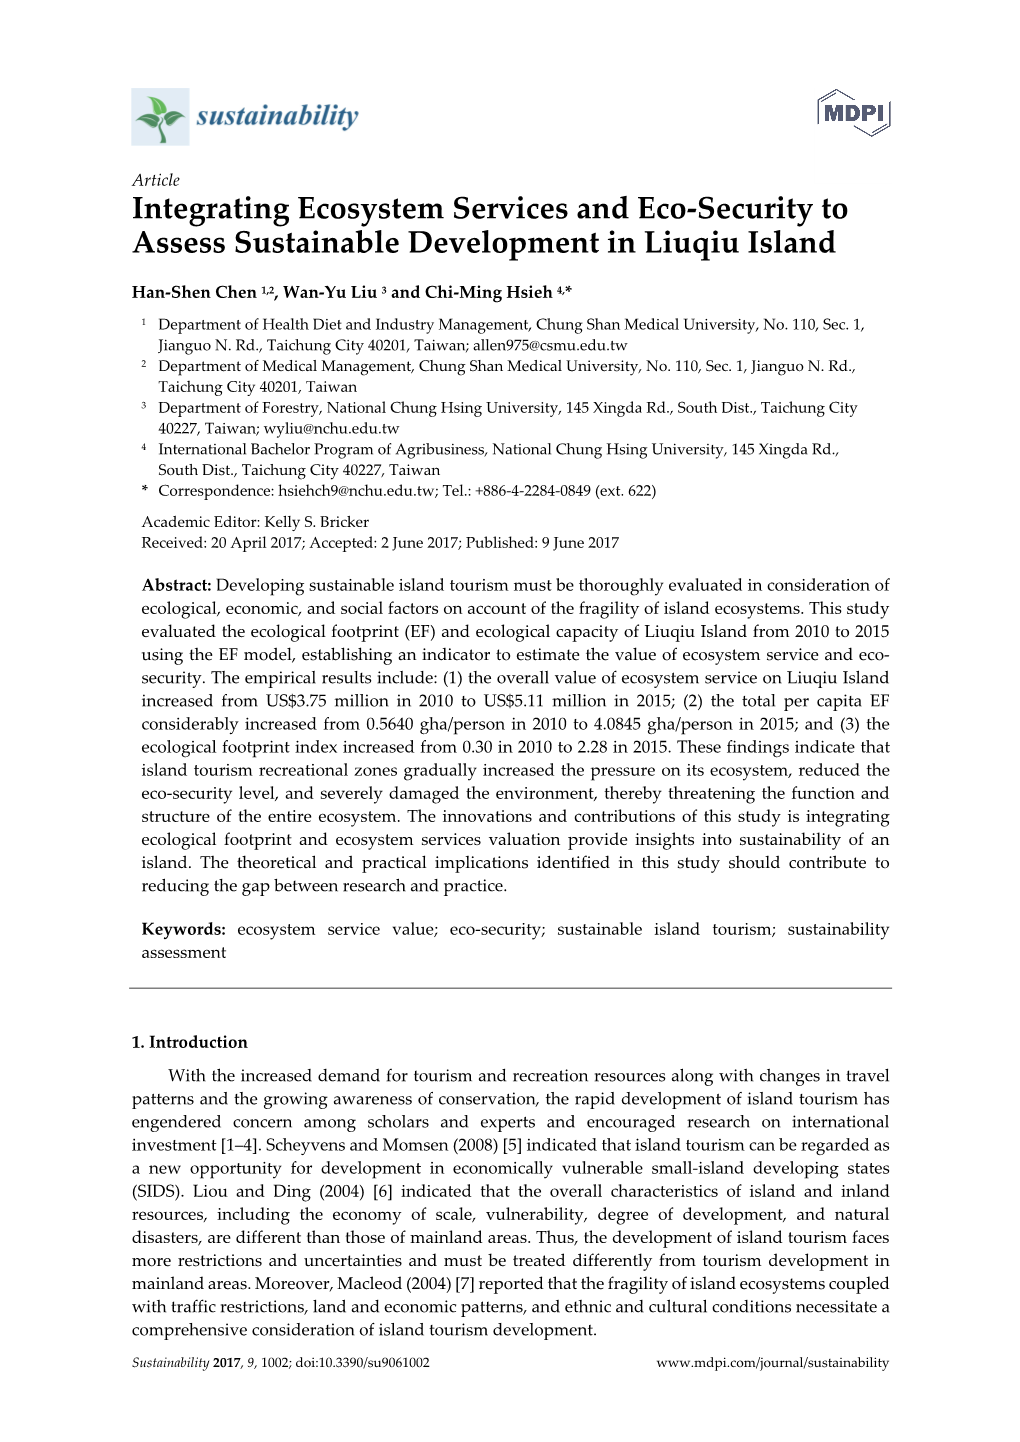 Integrating Ecosystem Services and Eco-Security to Assess Sustainable Development in Liuqiu Island